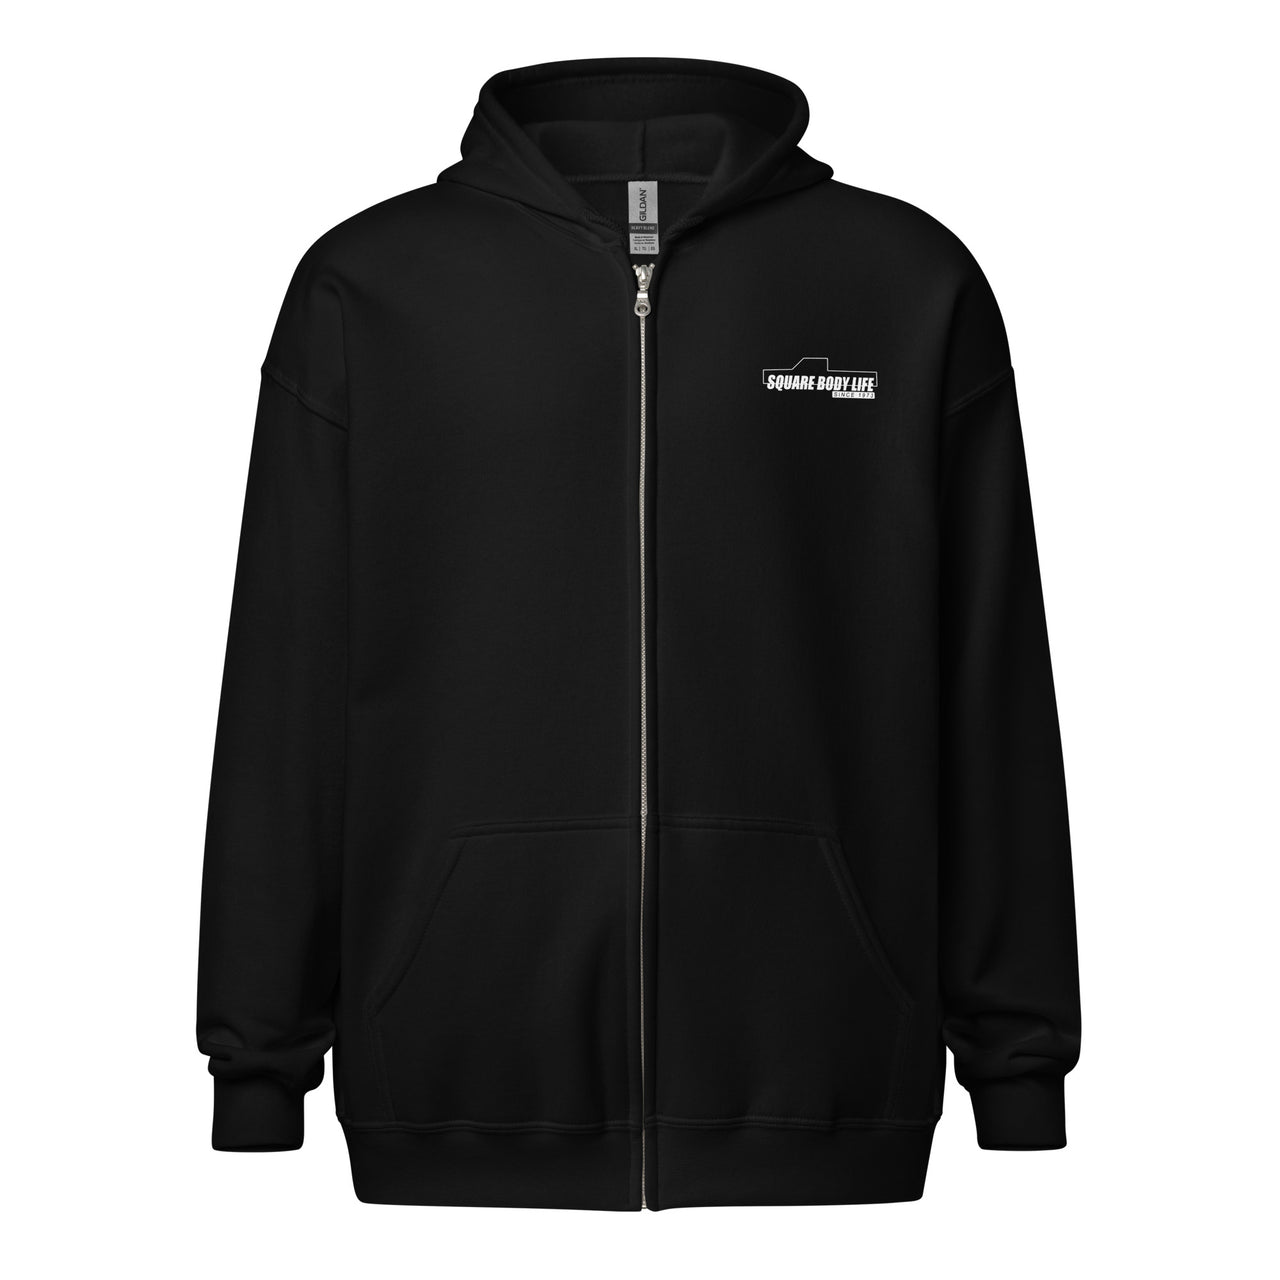 Square Body truck zip up hoodie in black - front view